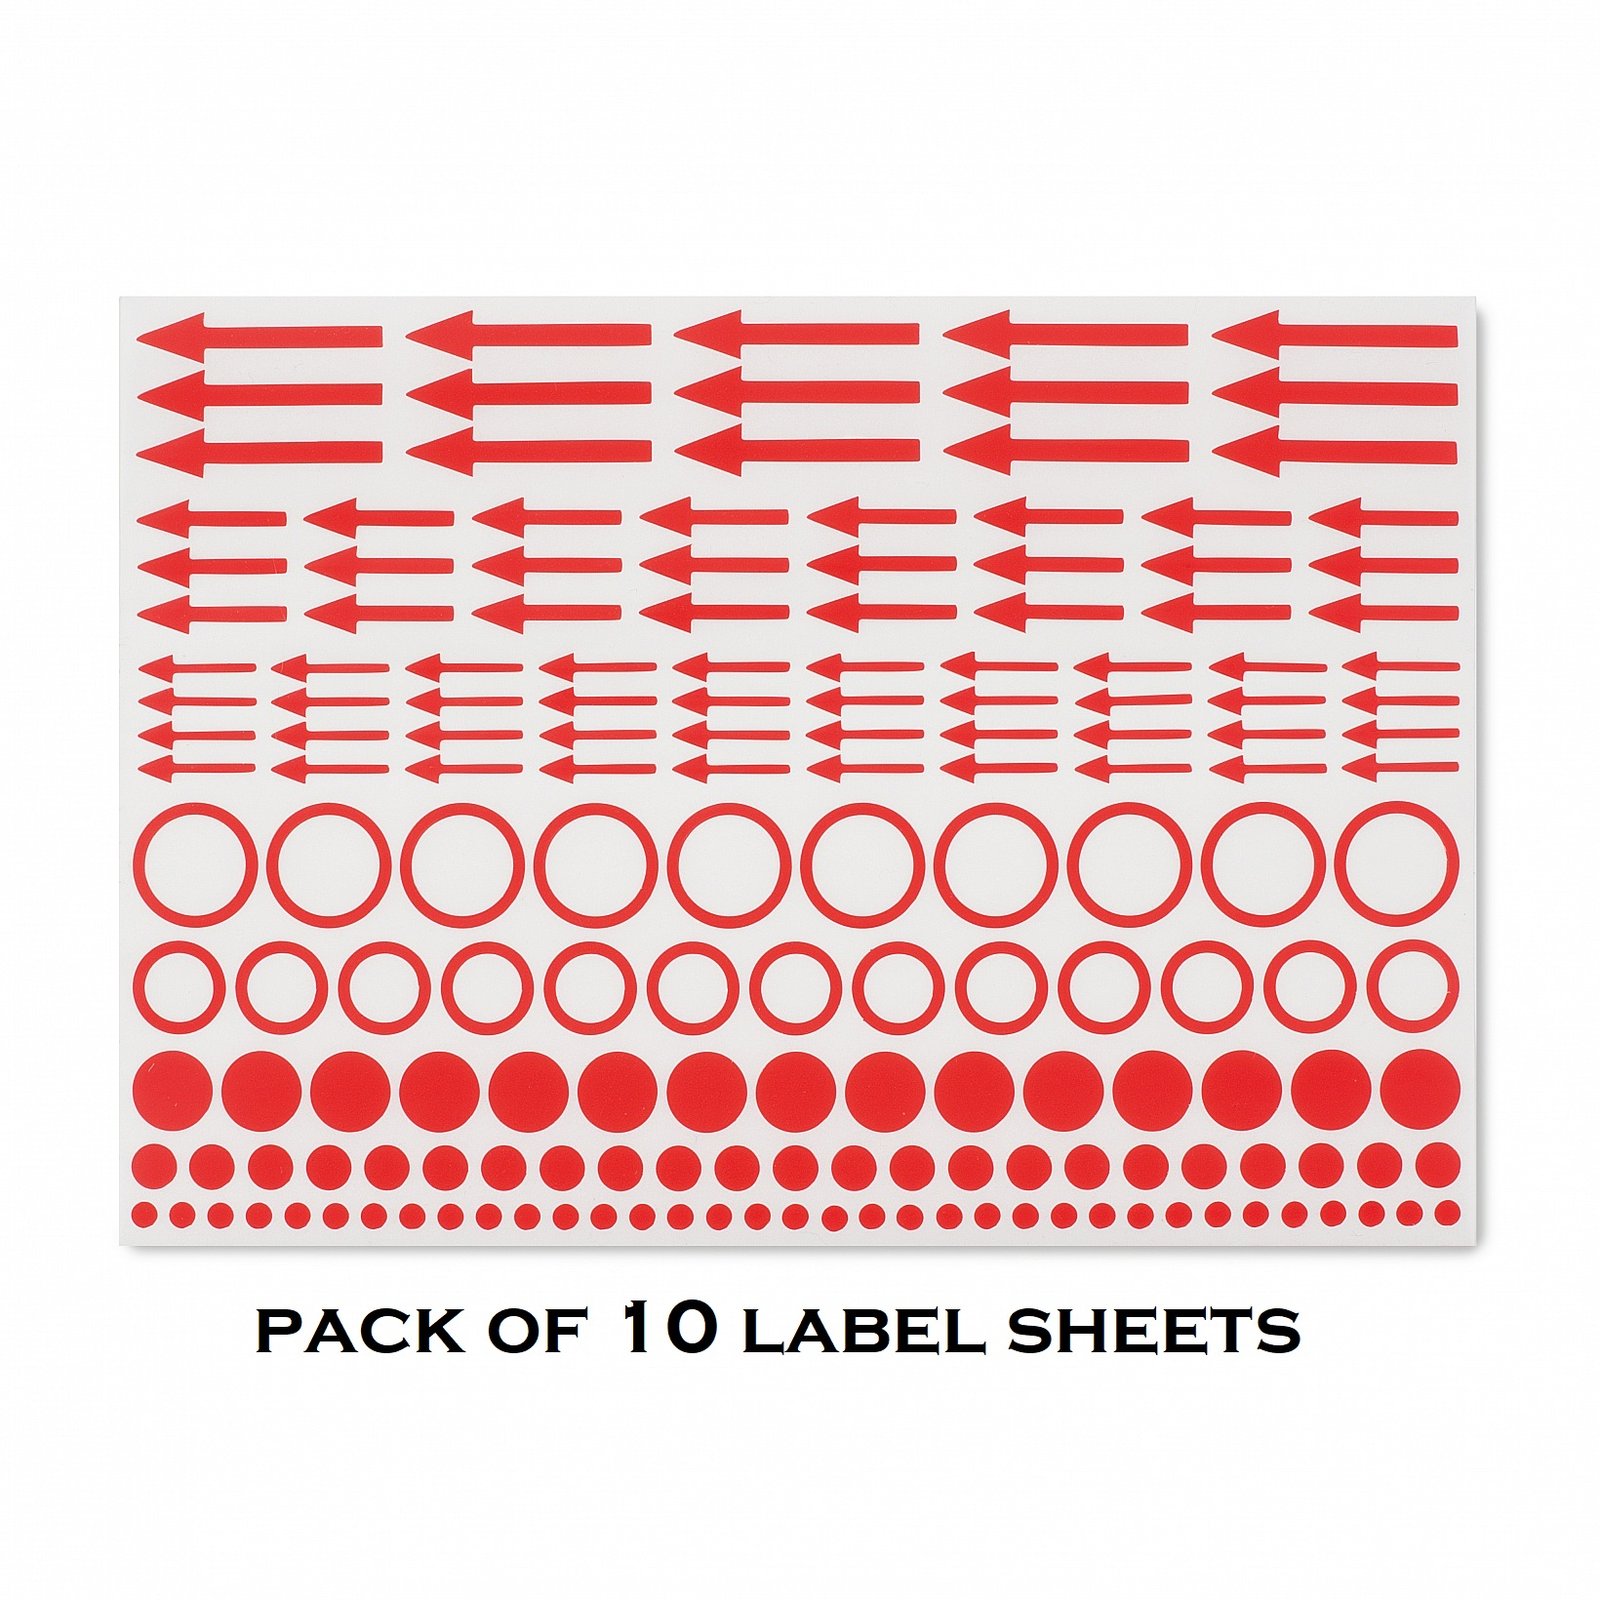 Lighthouse Indicator labels, Self-adhesive, Pack of 10 Label Sheets (Include various dots, circles and arrows), Made In Germany